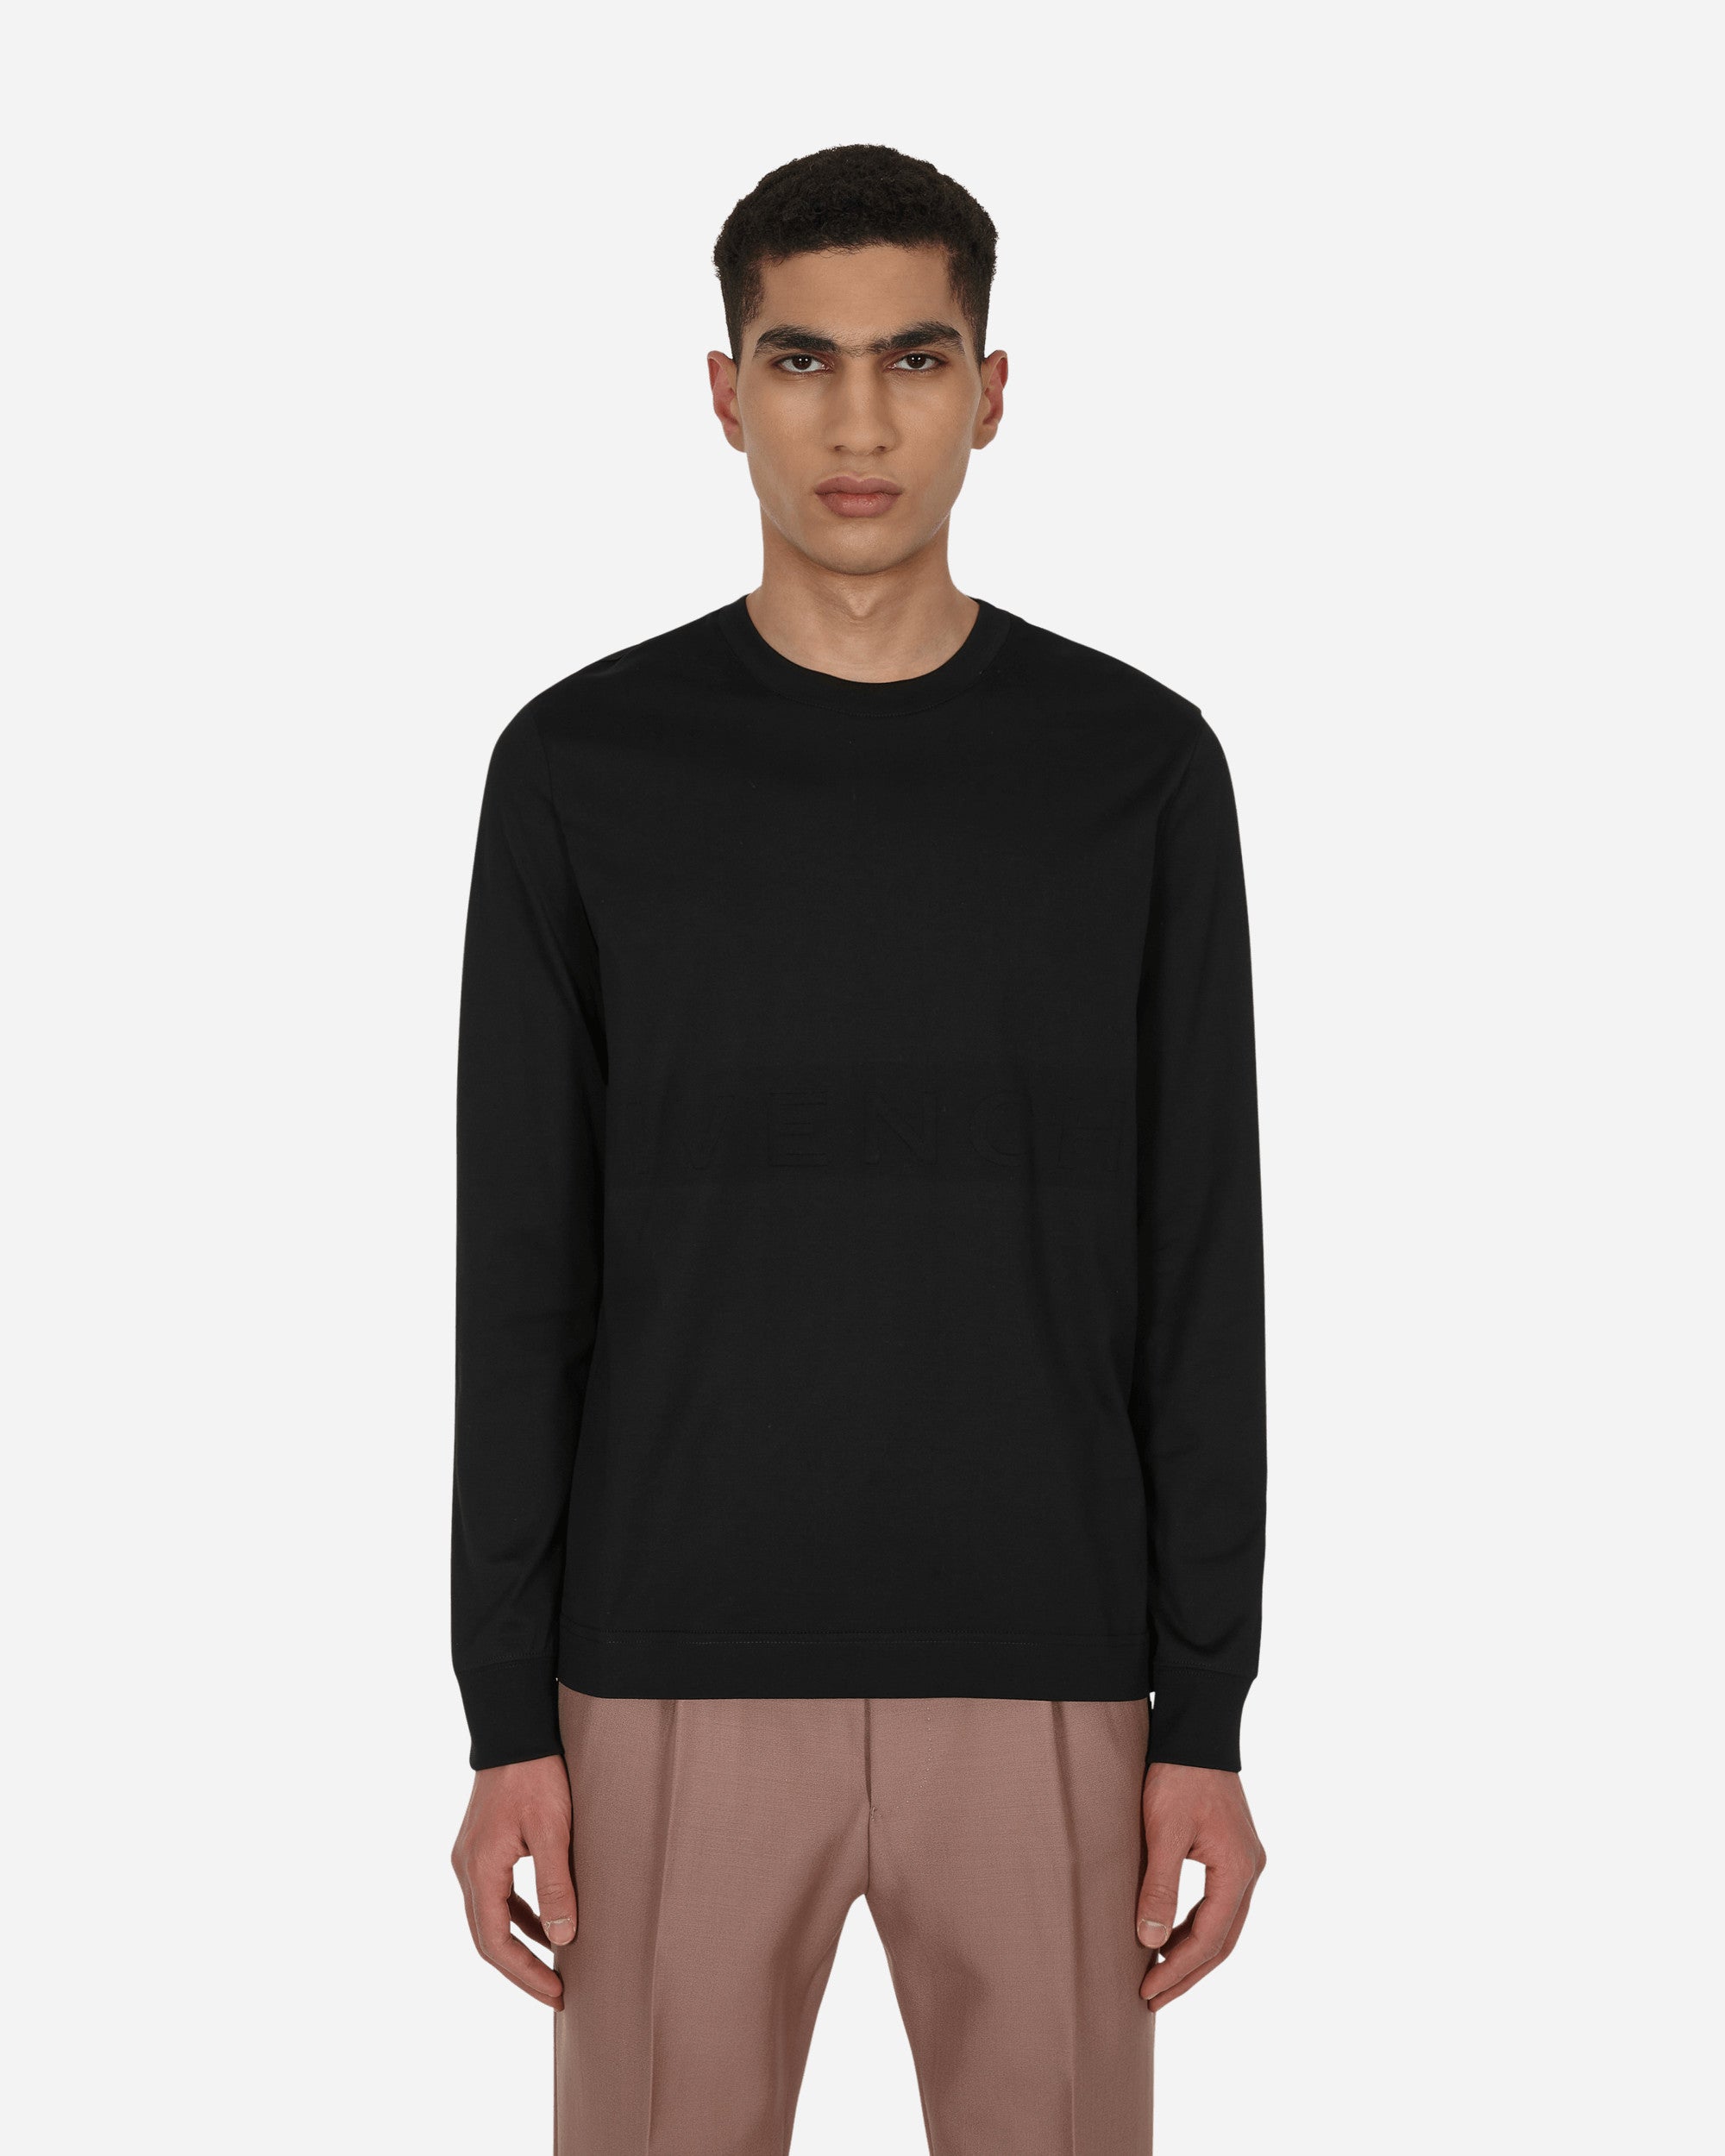 Givenchy Slim Fit Ls T-Shirt With Bonded Branding Black T-Shirts Longsleeve BM71BY3Y6B 001